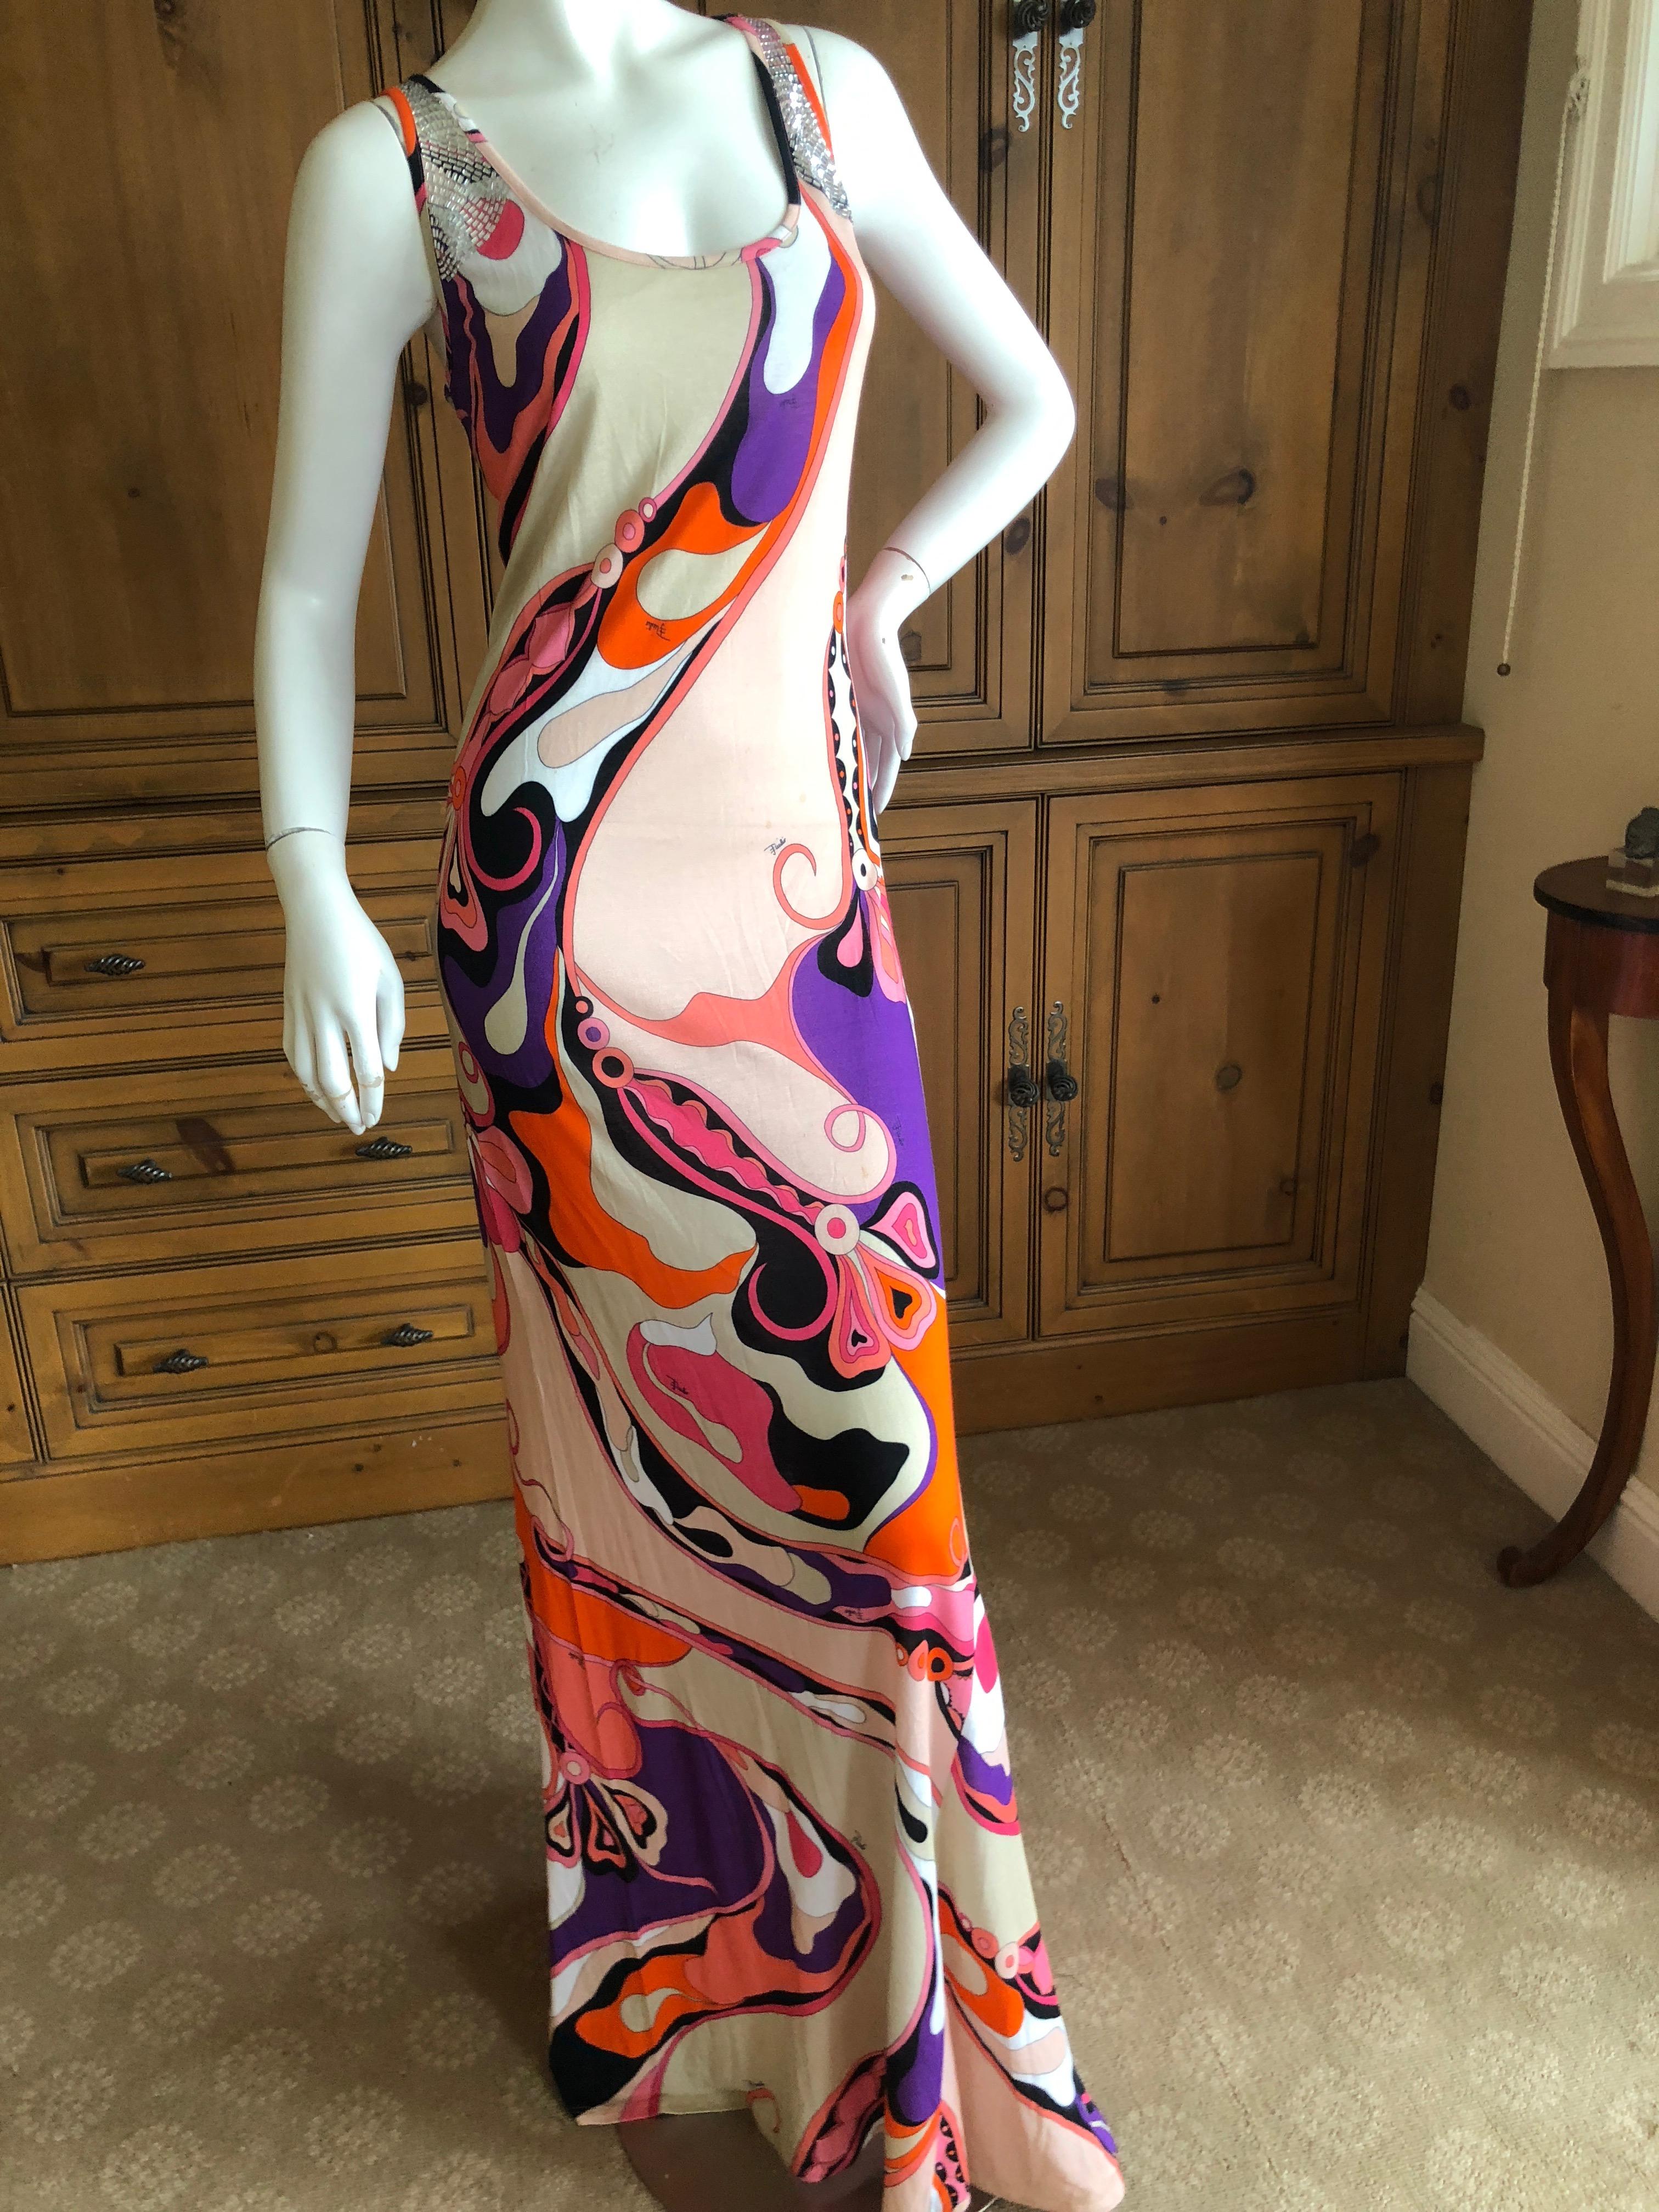 Emilio Pucci Embellished Tank Style Sleeveless Evening Dress Size 12 In Excellent Condition For Sale In Cloverdale, CA